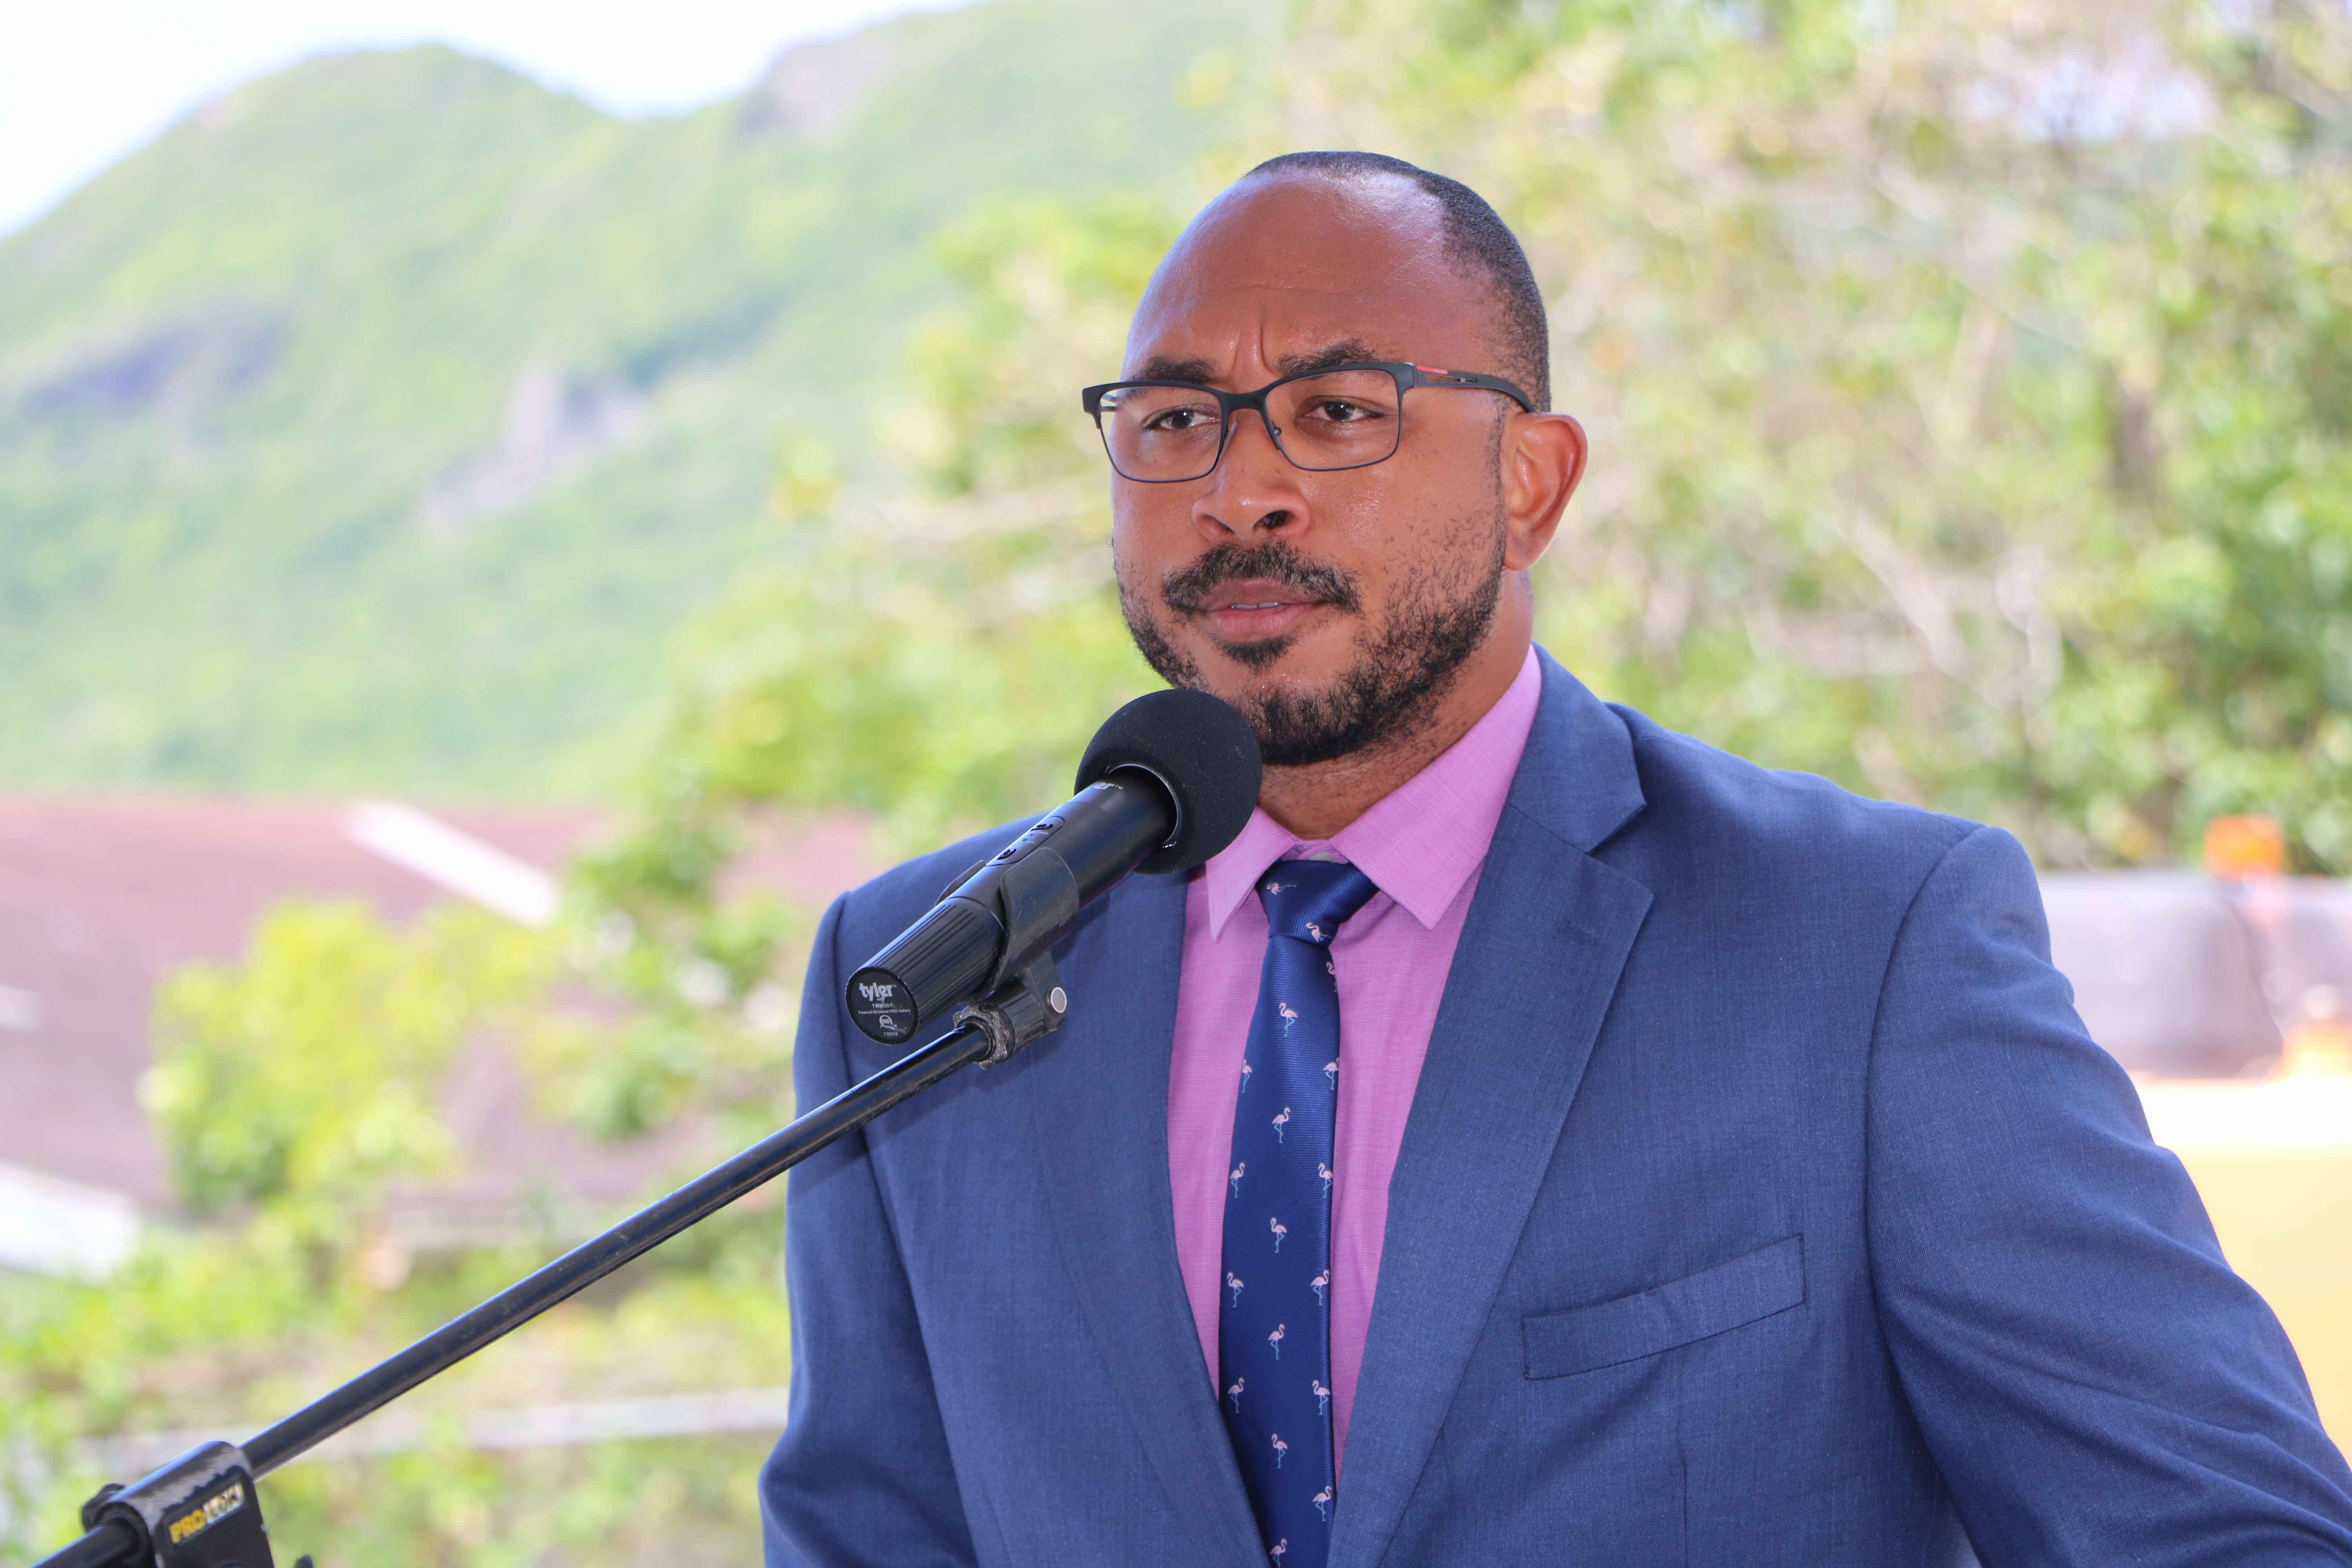 Hon. Jonel Powell, Minister of Education in St. Kitts and Nevis delivering remarks at a ground breaking ceremony on August 06, 2020, for the construction of a state-of-the-art technical wing at the Gingerland Secondary School